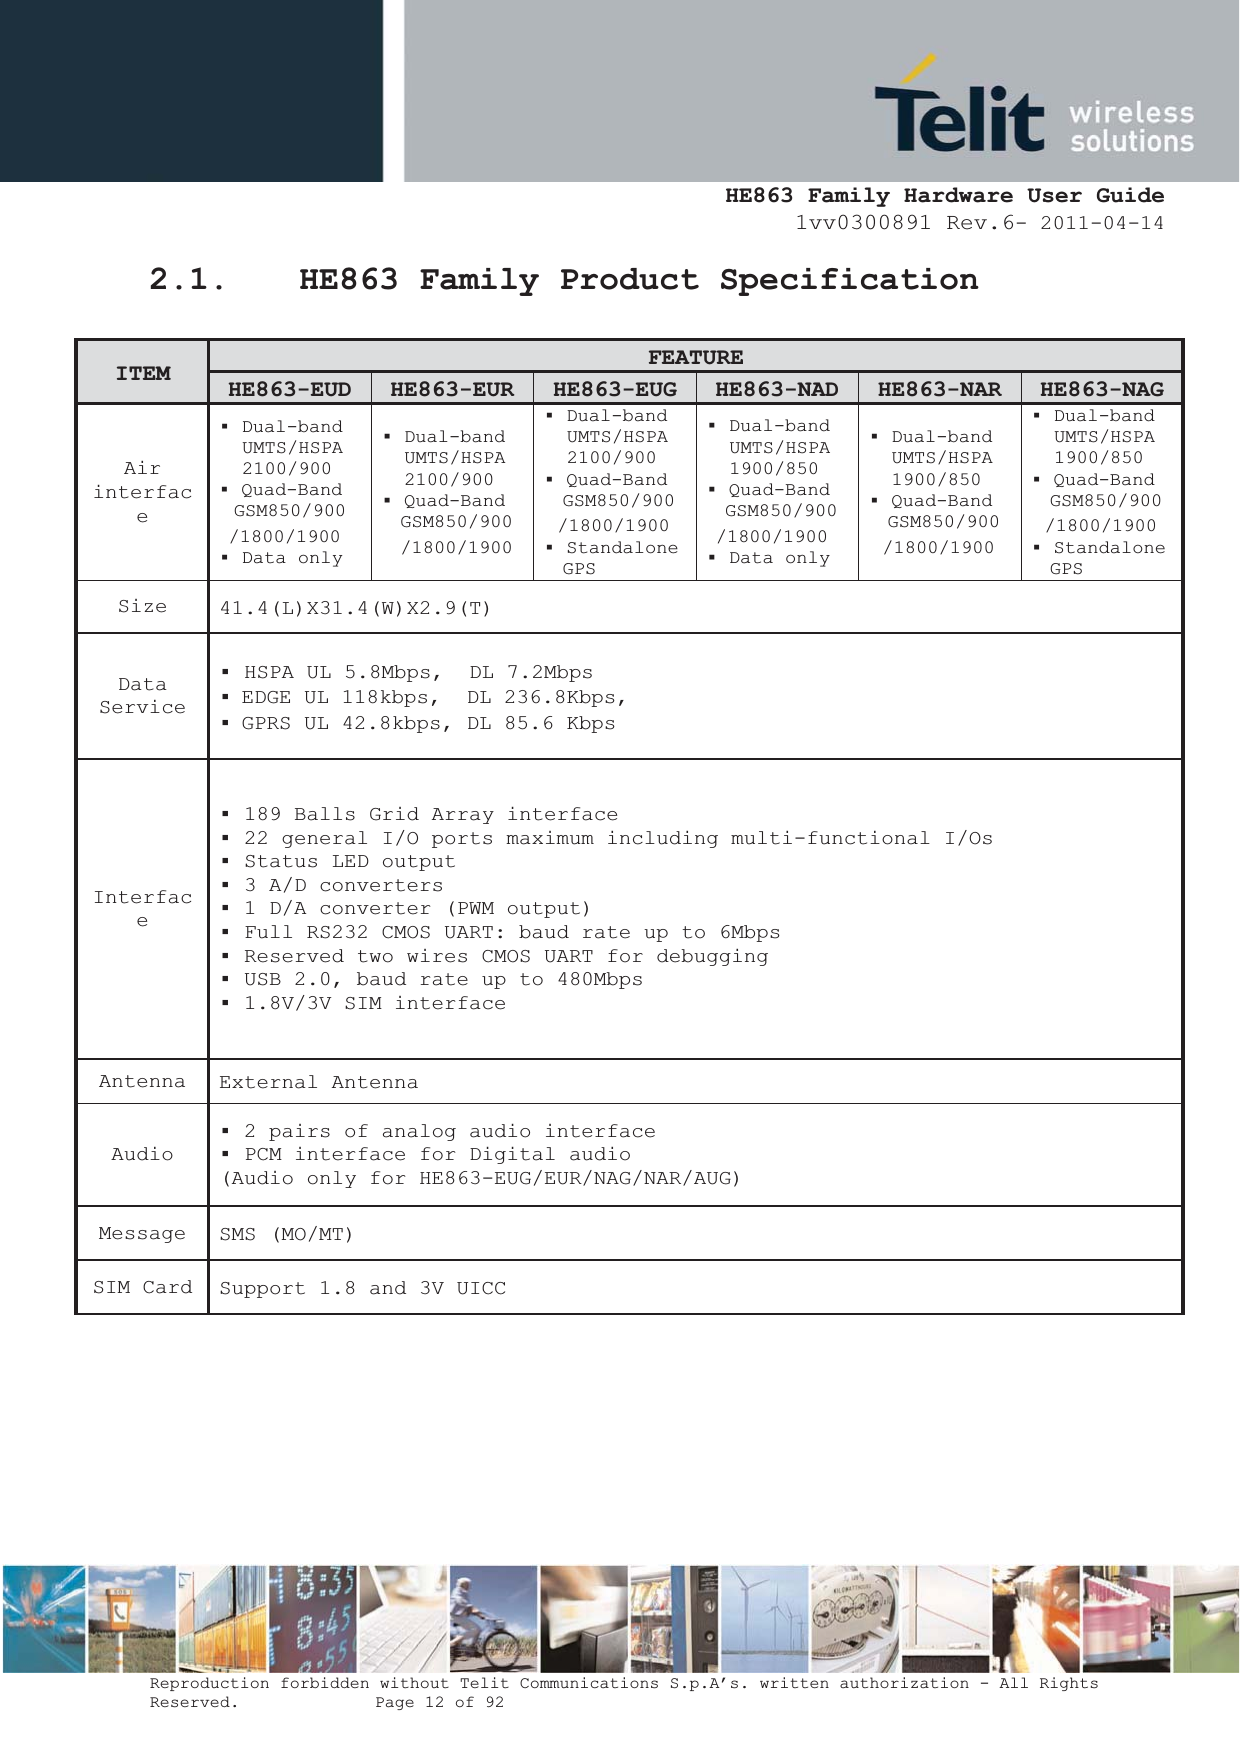  HE863 Family Hardware User Guide 1vv0300891 Rev.6- 2011-04-14    Reproduction forbidden without Telit Communications S.p.A’s. written authorization - All Rights Reserved.    Page 12 of 92  2.1. HE863 Family Product Specification ITEM FEATUREHE863-EUD HE863-EUR HE863-EUG HE863-NAD HE863-NAR HE863-NAGAir  interface ƒ Dual-band  UMTS/HSPA 2100/900 ƒ Quad-Band  GSM850/900 /1800/1900 ƒ Data only ƒ Dual-band UMTS/HSPA 2100/900 ƒ Quad-Band GSM850/900 /1800/1900 ƒ Dual-band UMTS/HSPA 2100/900 ƒ Quad-Band GSM850/900 /1800/1900 ƒ Standalone GPS ƒ Dual-band UMTS/HSPA 1900/850 ƒ Quad-Band GSM850/900 /1800/1900 ƒ Data only ƒ Dual-band  UMTS/HSPA 1900/850 ƒ Quad-Band  GSM850/900 /1800/1900 ƒ Dual-band UMTS/HSPA 1900/850 ƒ Quad-Band GSM850/900 /1800/1900 ƒ Standalone GPS Size  41.4(L)X31.4(W)X2.9(T) Data Service ƒ HSPA UL 5.8Mbps,  DL 7.2Mbps ƒ EDGE UL 118kbps,  DL 236.8Kbps, ƒ GPRS UL 42.8kbps, DL 85.6 Kbps Interface ƒ 189 Balls Grid Array interface ƒ 22 general I/O ports maximum including multi-functional I/Os ƒ Status LED output ƒ 3 A/D converters ƒ 1 D/A converter (PWM output) ƒ Full RS232 CMOS UART: baud rate up to 6Mbps ƒ Reserved two wires CMOS UART for debugging ƒ USB 2.0, baud rate up to 480Mbps ƒ 1.8V/3V SIM interface Antenna  External Antenna Audio ƒ 2 pairs of analog audio interface ƒ PCM interface for Digital audio (Audio only for HE863-EUG/EUR/NAG/NAR/AUG) Message  SMS (MO/MT) SIM Card  Support 1.8 and 3V UICC 